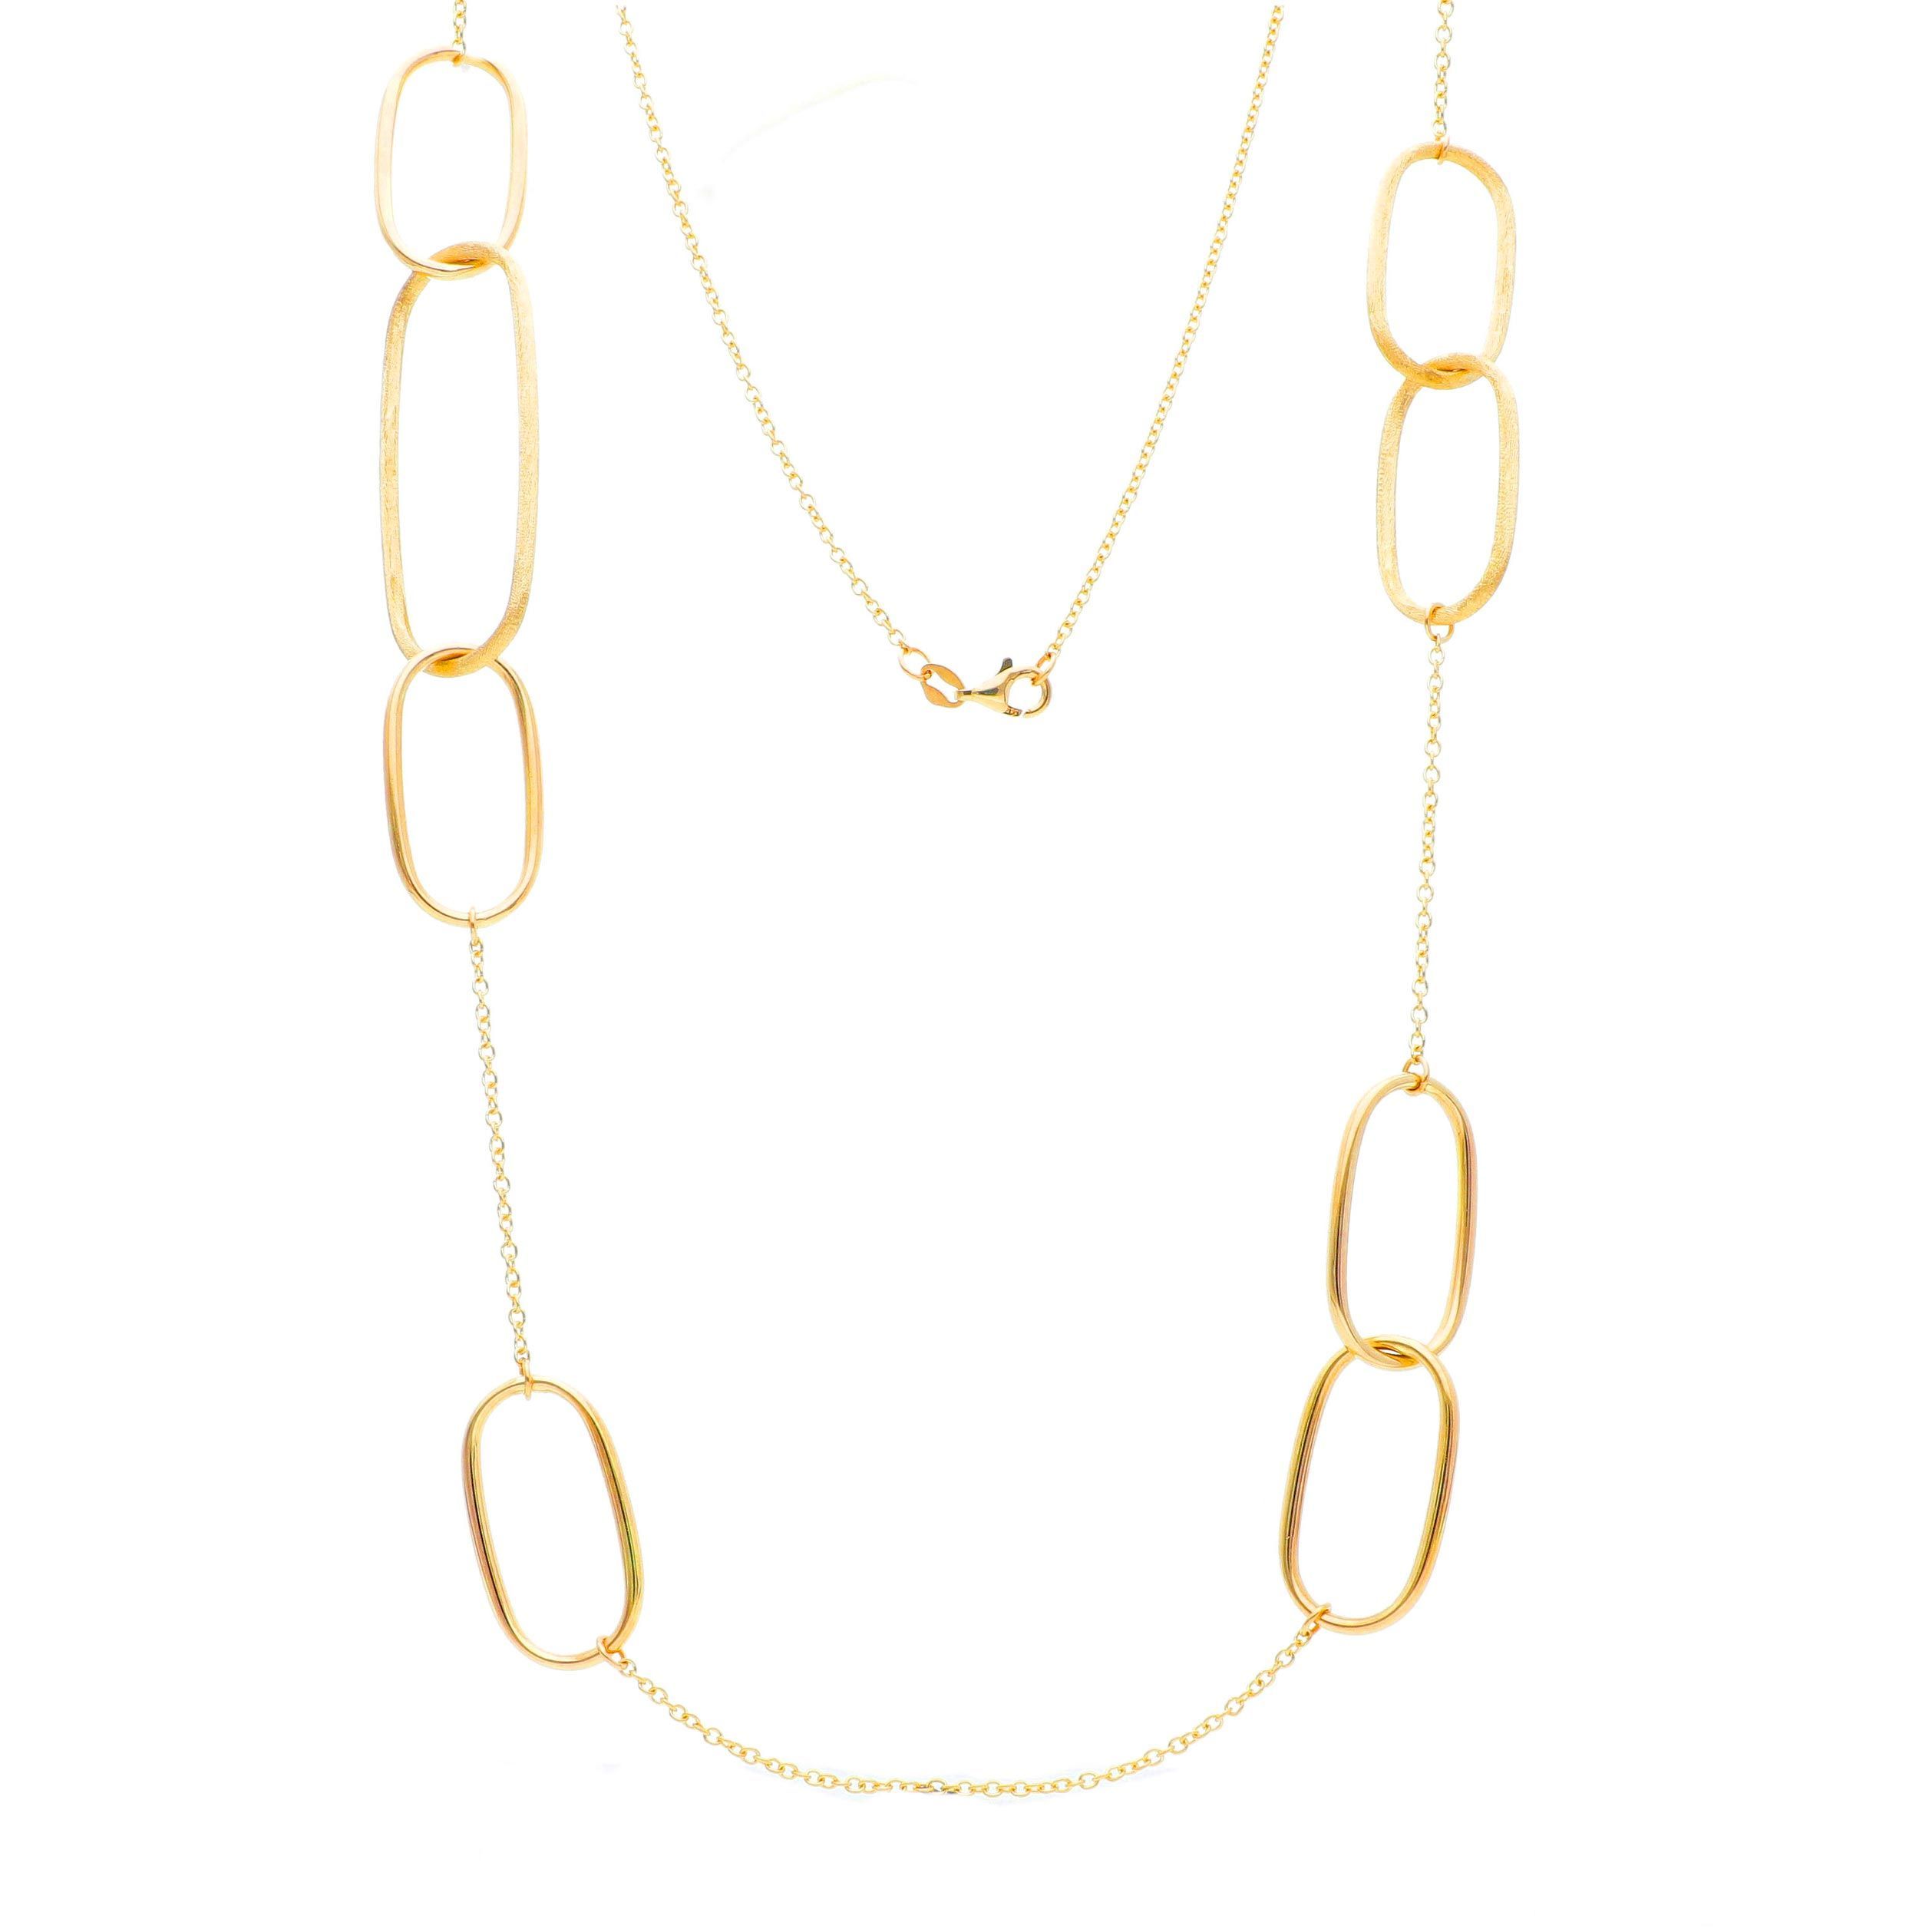 Goledn necklace k14 with rings (code S246020